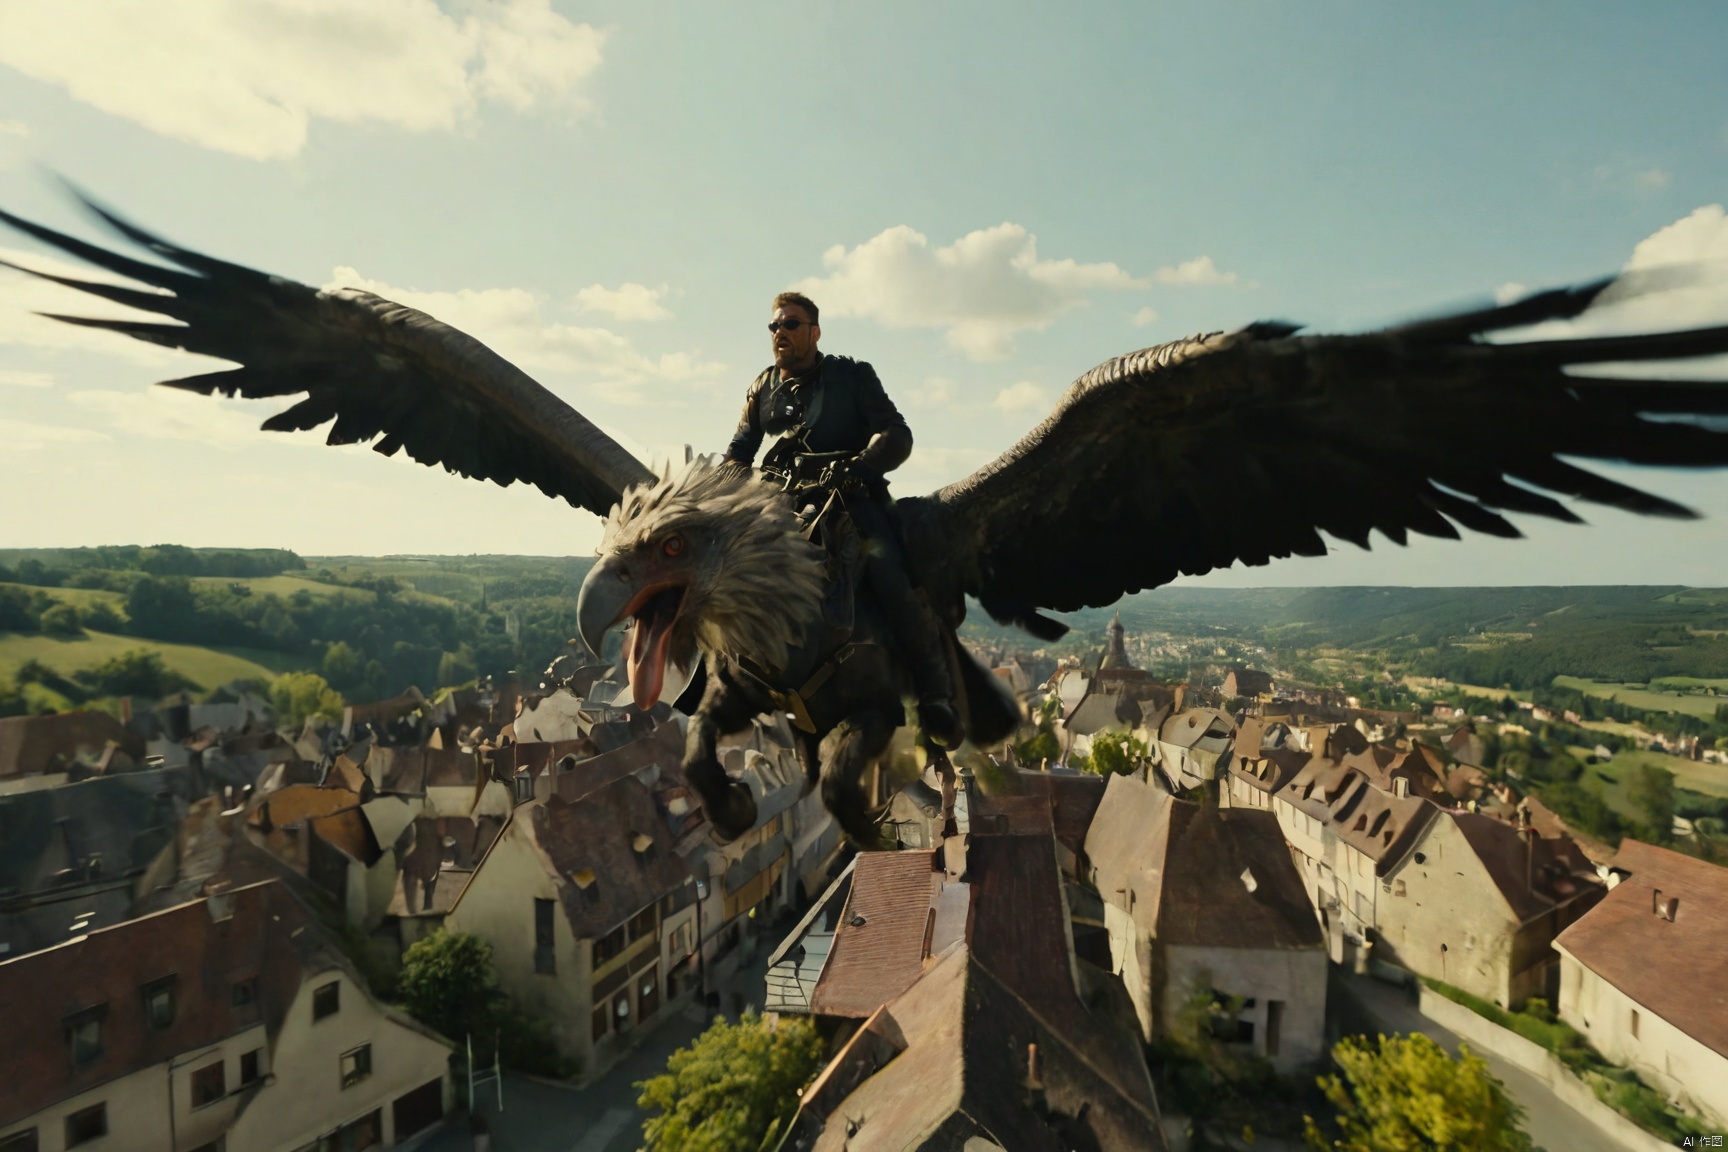  wide angle of , directed by directors cinemastyles, A griffon rider patrolling the skies over a European towns.

